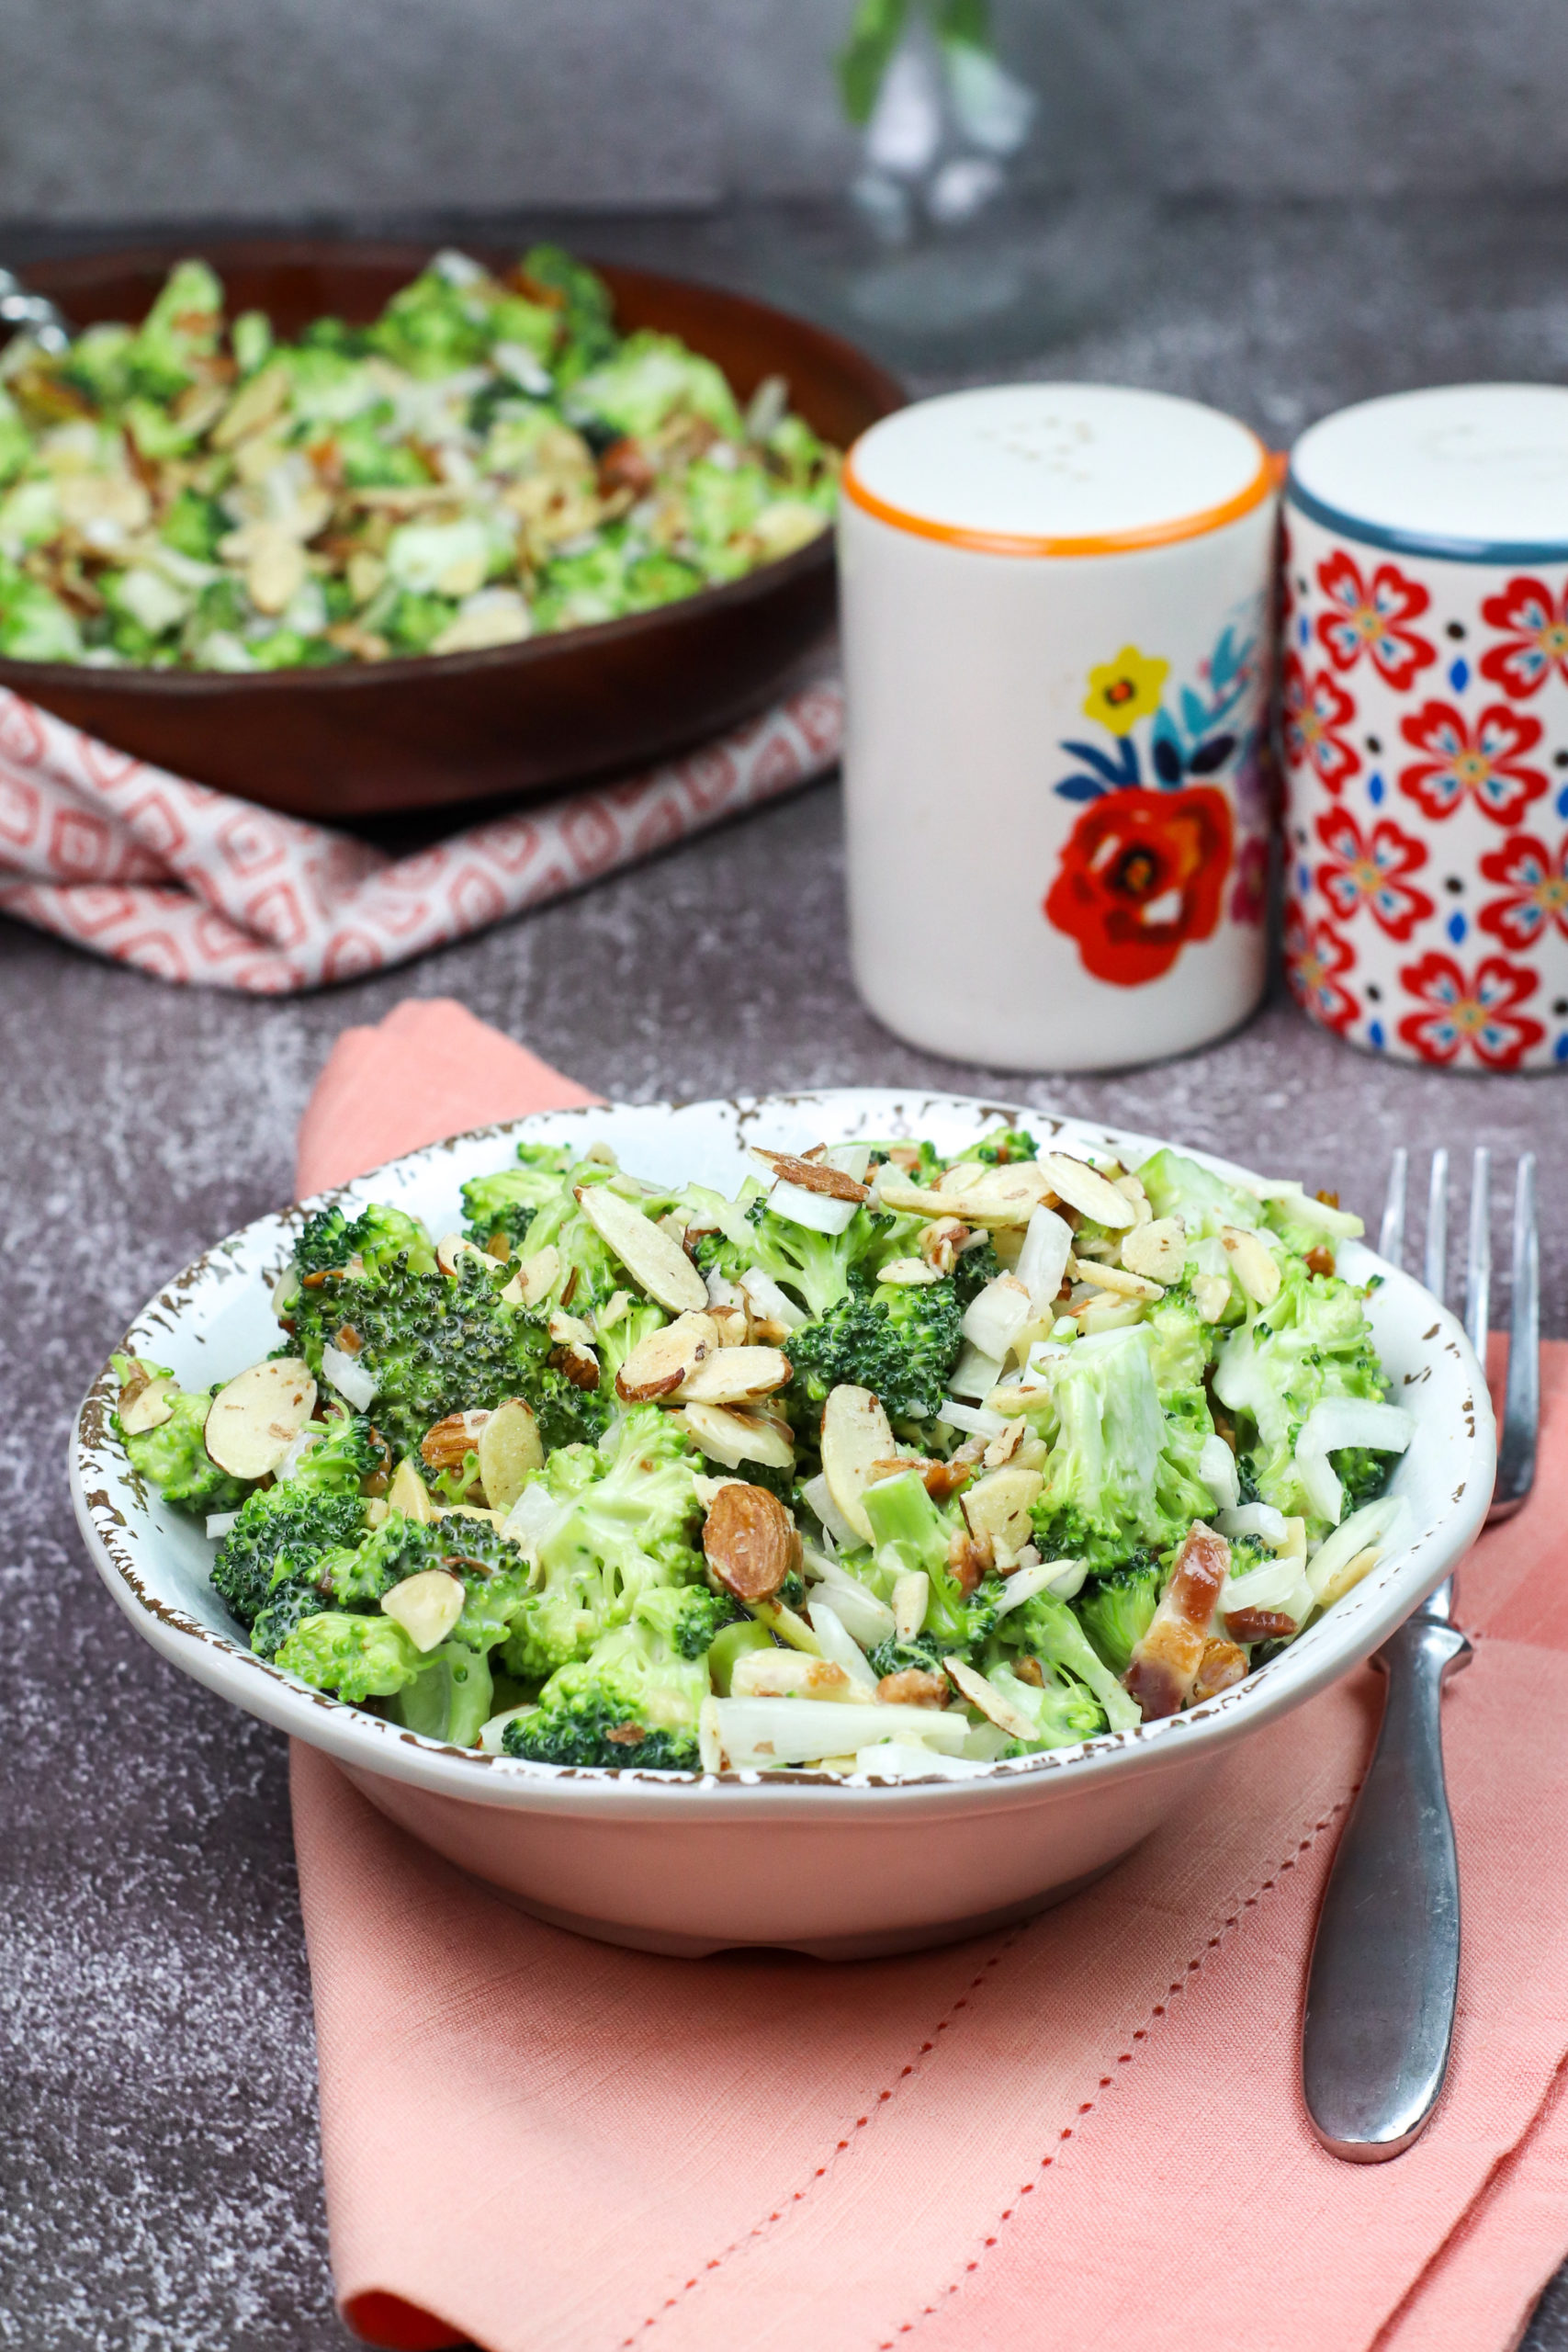 Side view of the Broccoli Almond Salad.